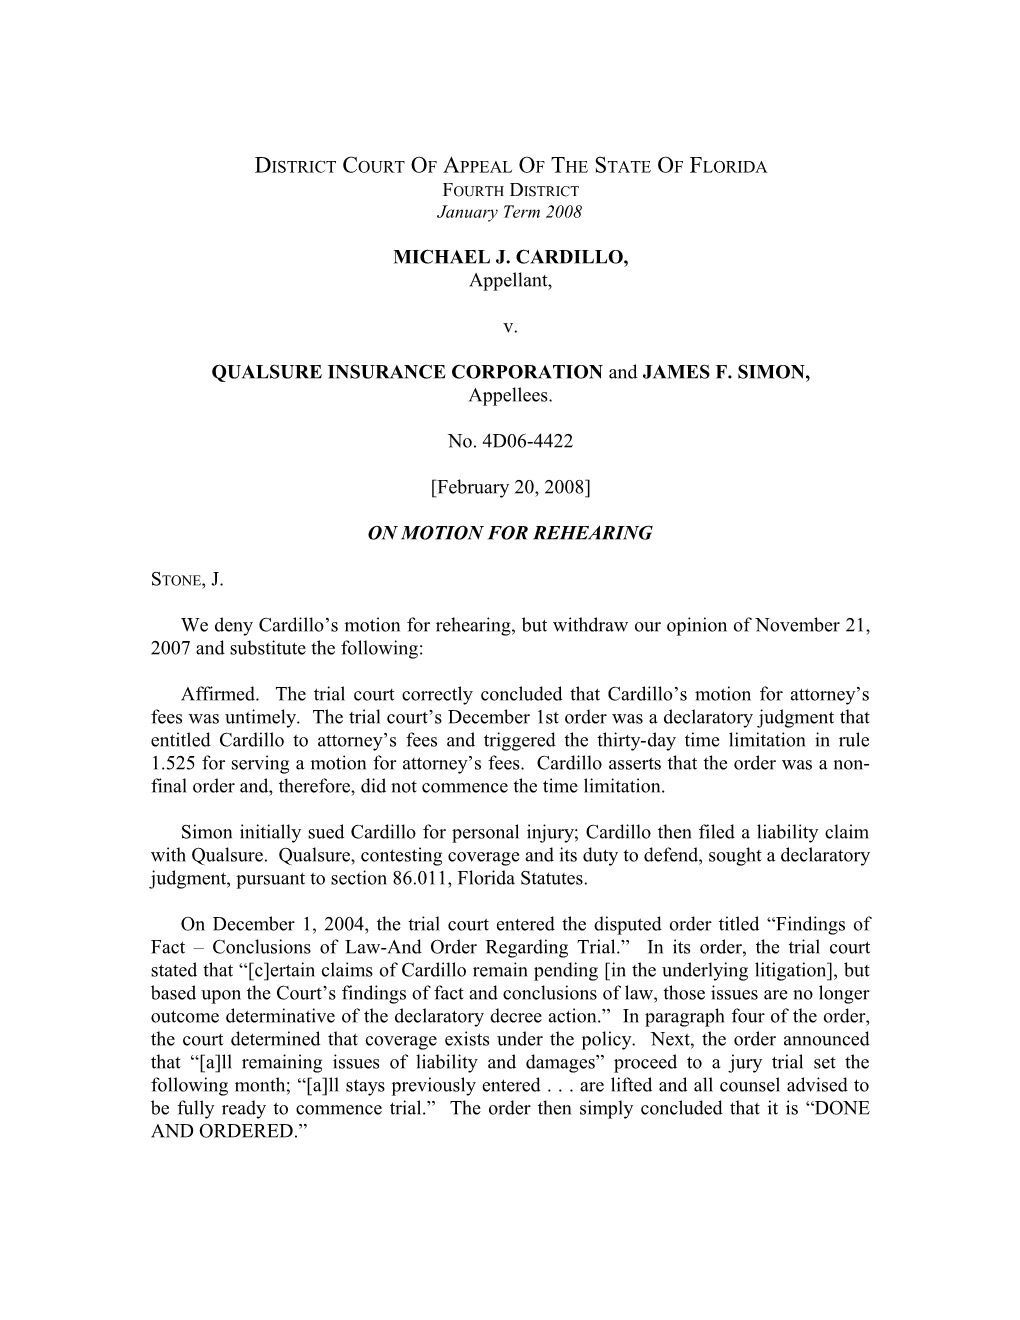 District Court of Appeal of the State of Florida s6